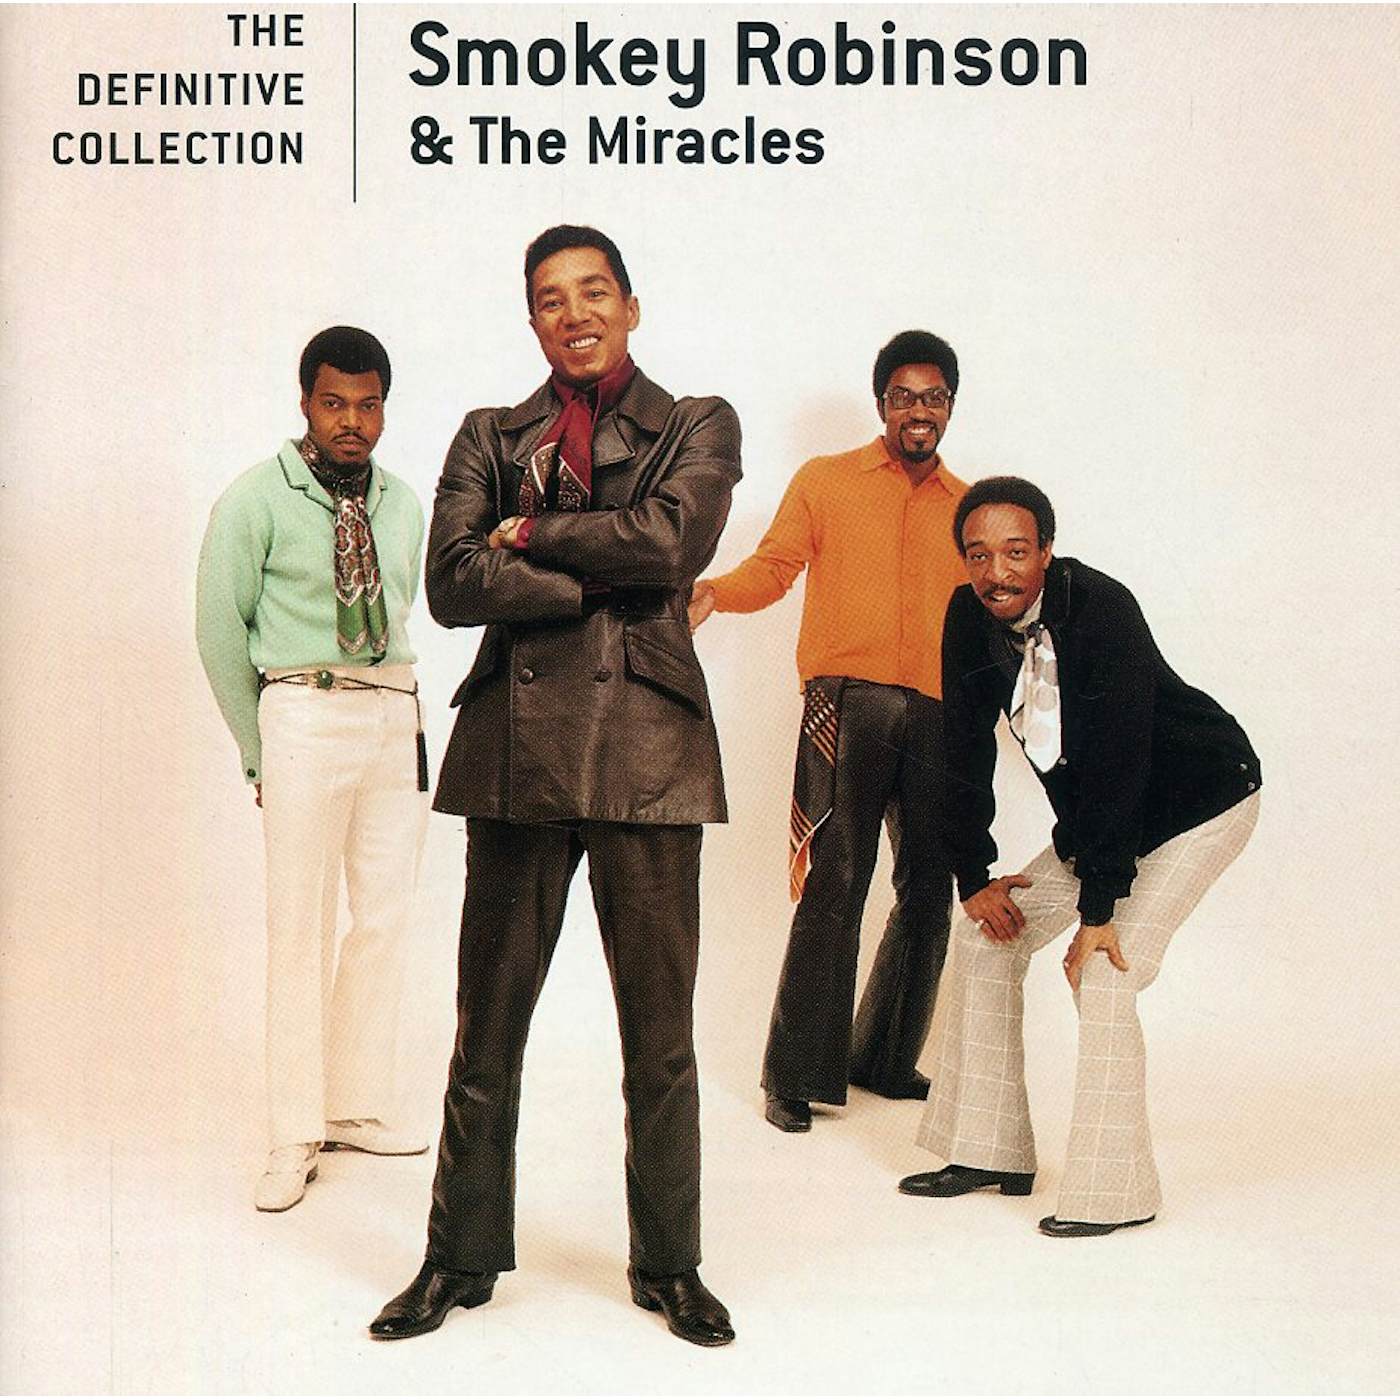 Smokey Robinson & The Miracles DEFINITIVE COLLECTION CD